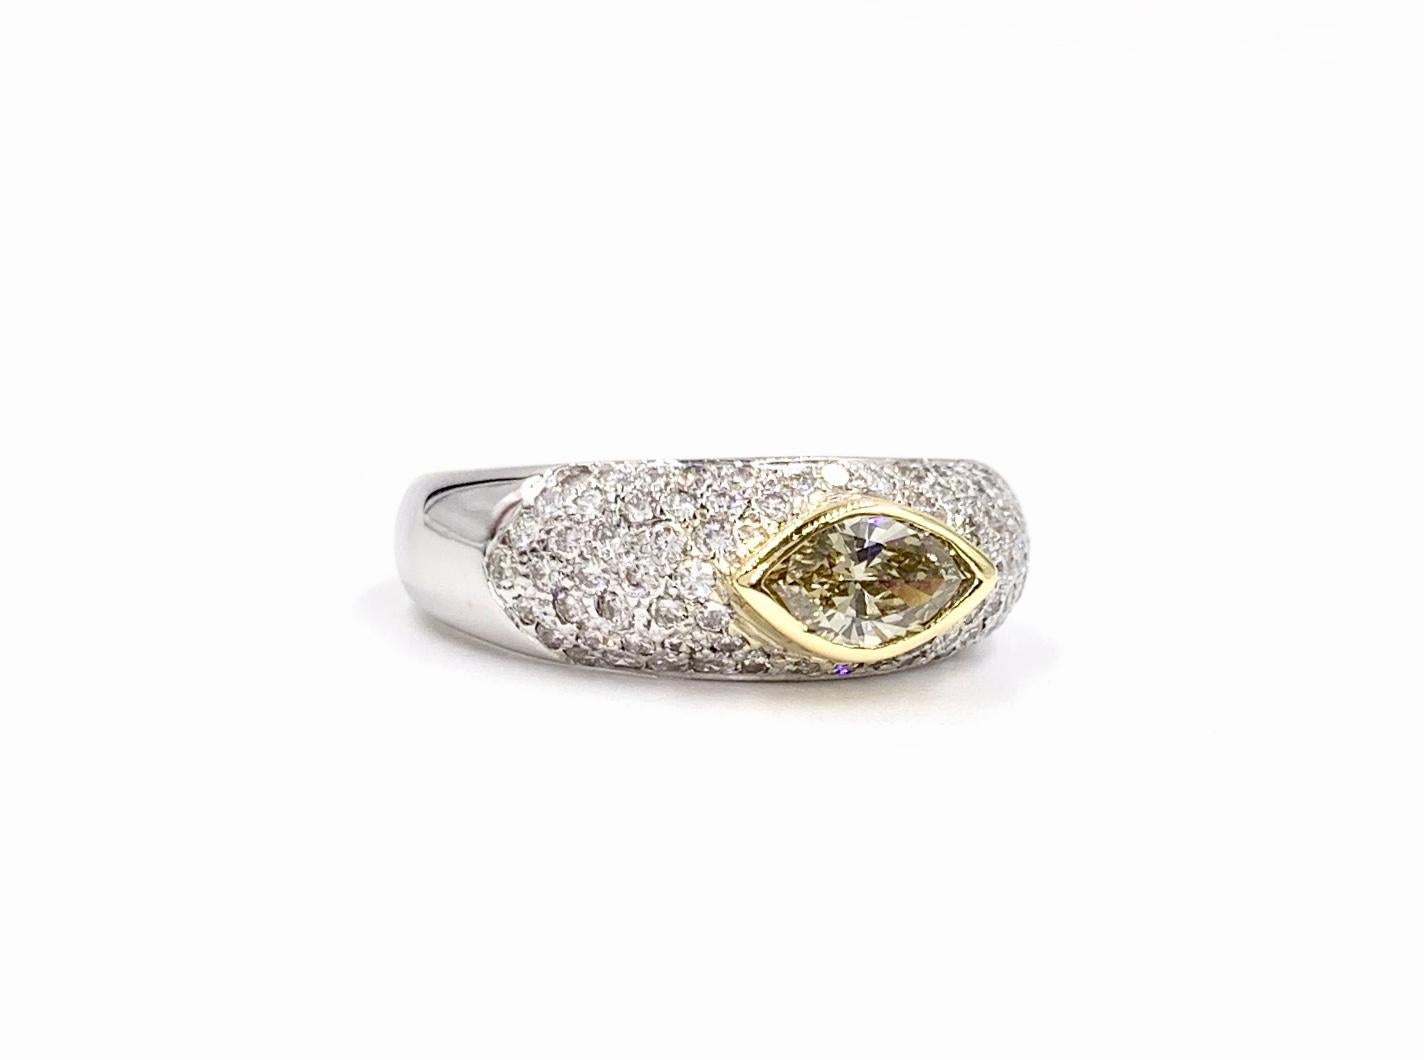 A wearable and comfortable 14 karat white gold slightly domed ring featuring a champagne color marquise center diamond, showing it's warmth as it is beautifully bezel set in yellow gold surrounded by pavé set white diamonds. Marquise has an